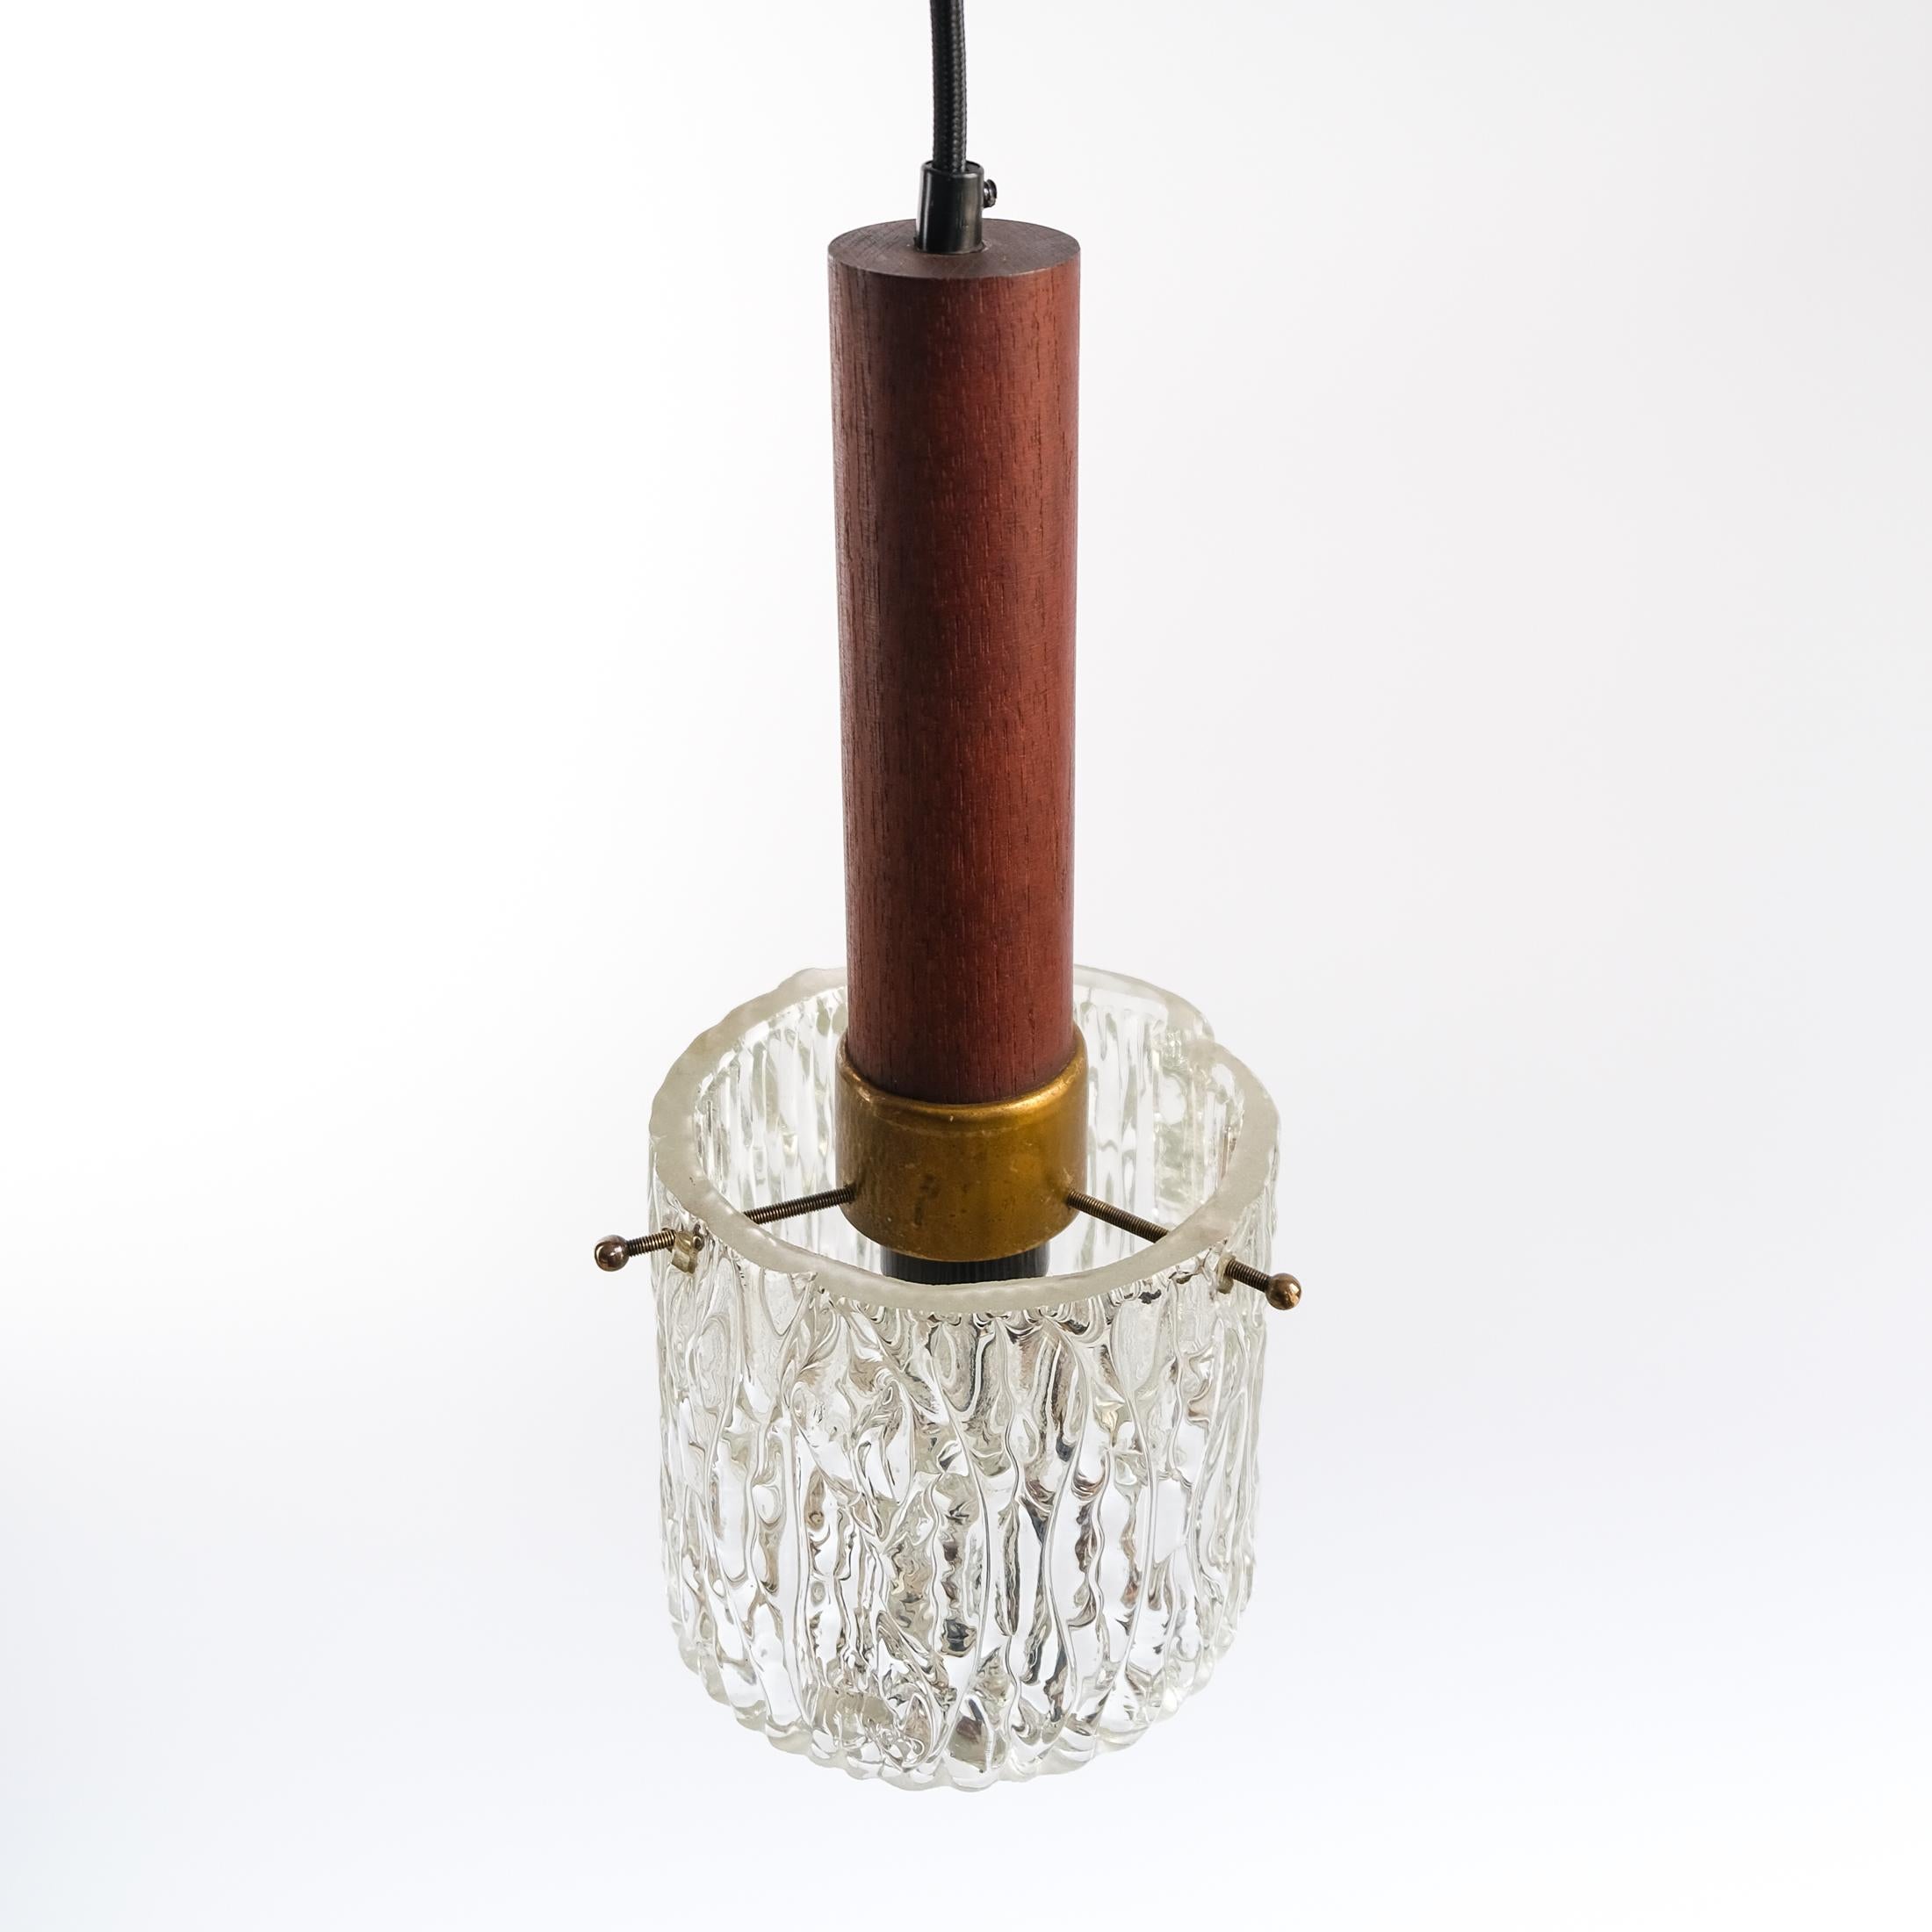 For sale is a Mid-Century Modernist Scandinavian Teak, Brass & Textured Ice-Glass Pendant Light, dating from circa 1960s.

In good working order, with its original teak ceiling rose and re-wired with a black braided cloth cord. The light is in fair